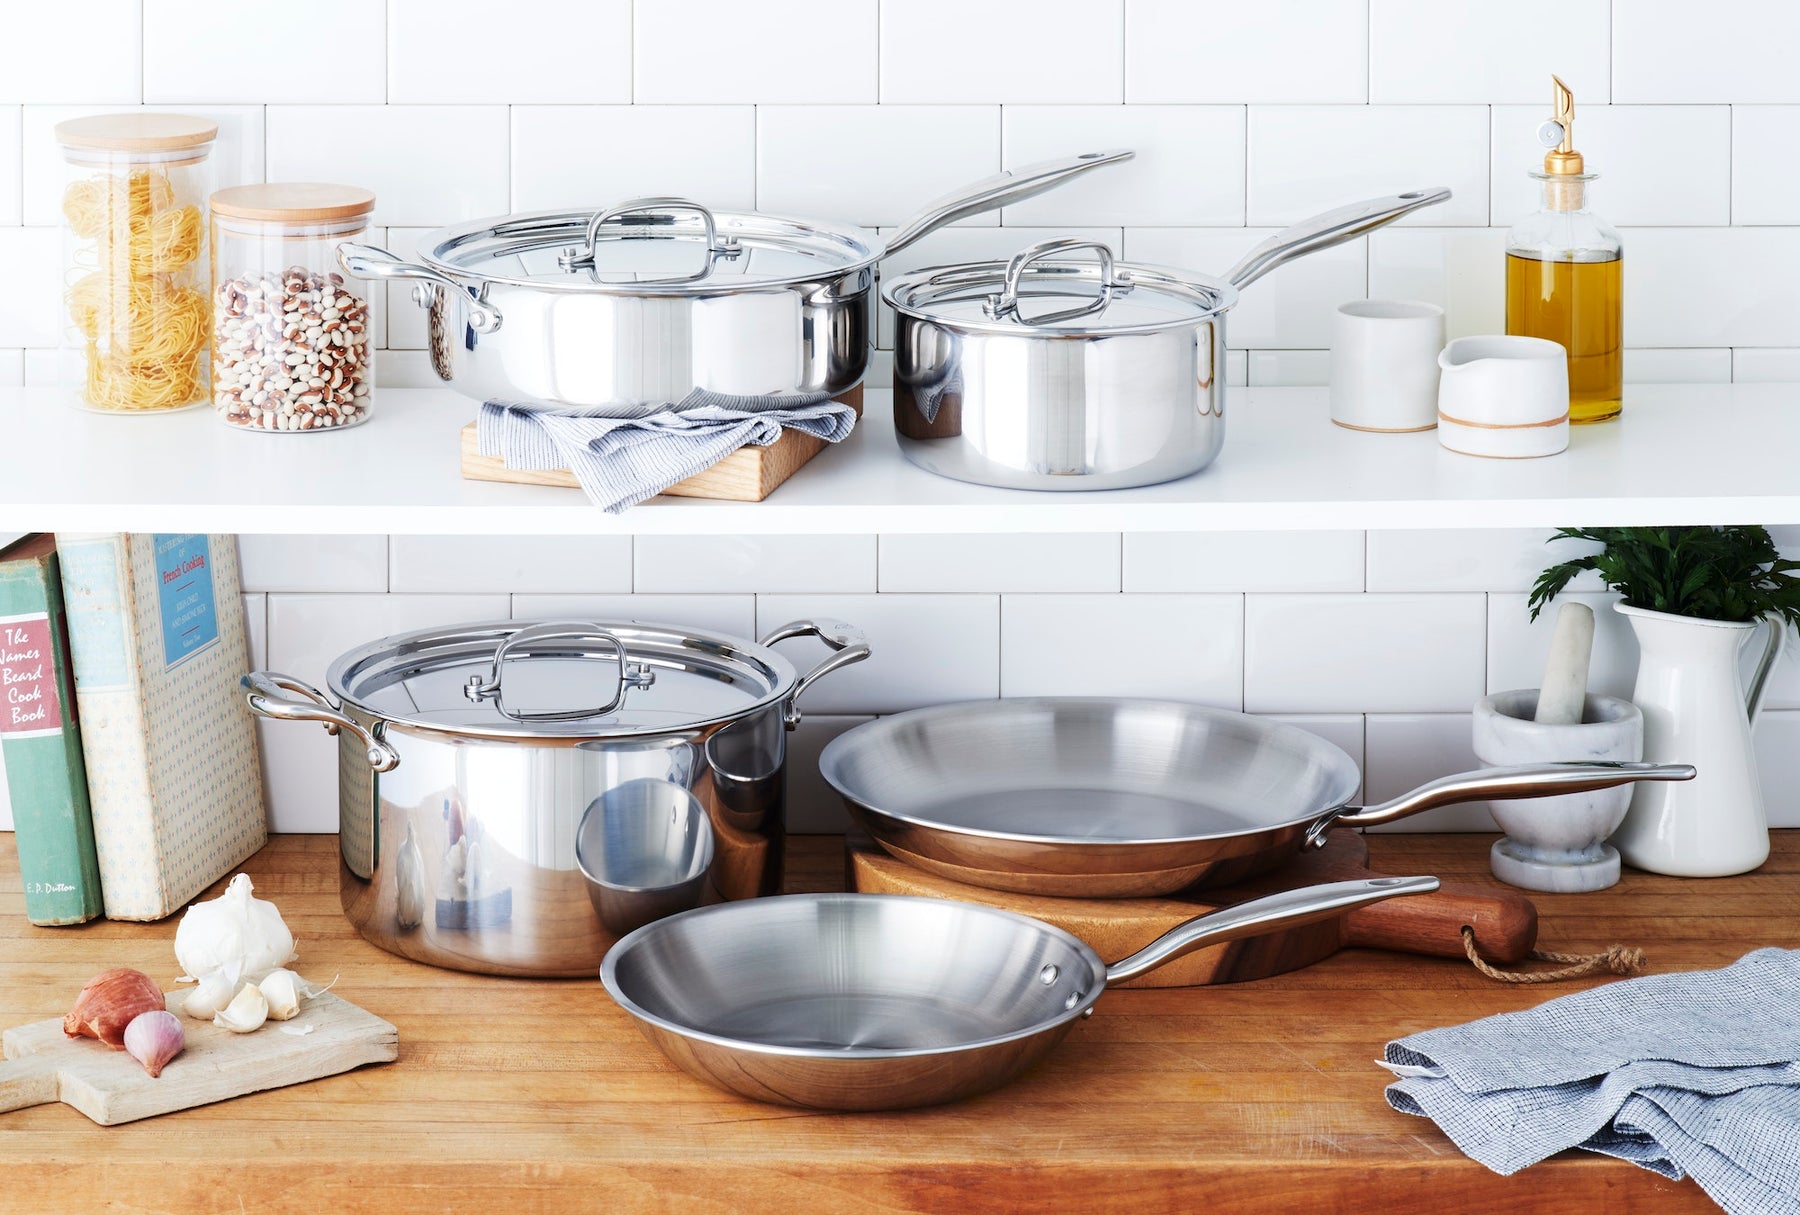 The Recipe for Great Cookware – Heritage Steel